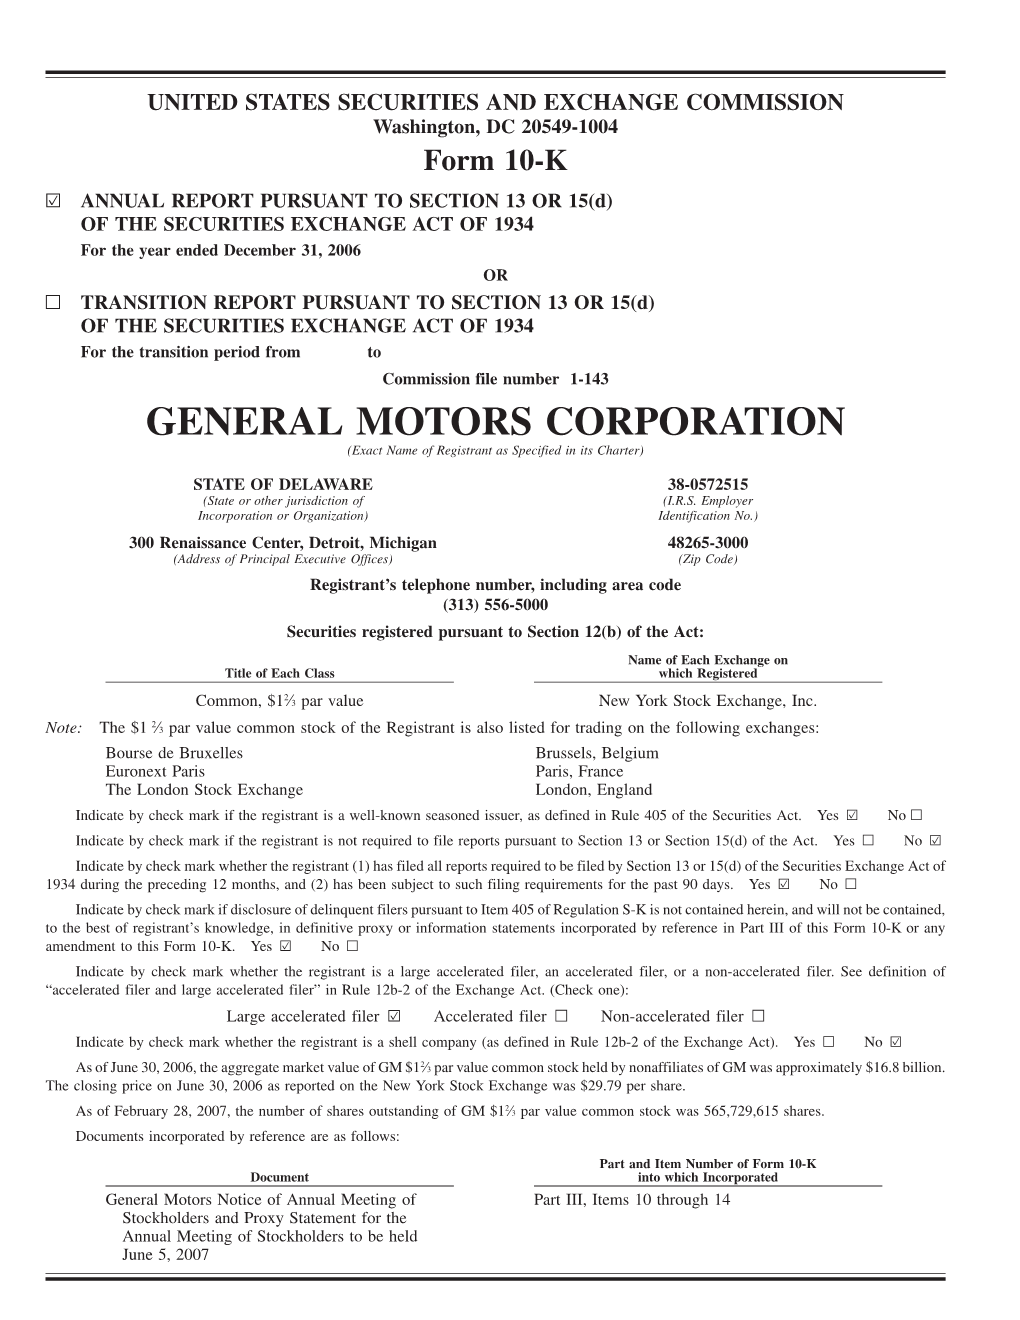 GENERAL MOTORS CORPORATION (Exact Name of Registrant As Specified in Its Charter)